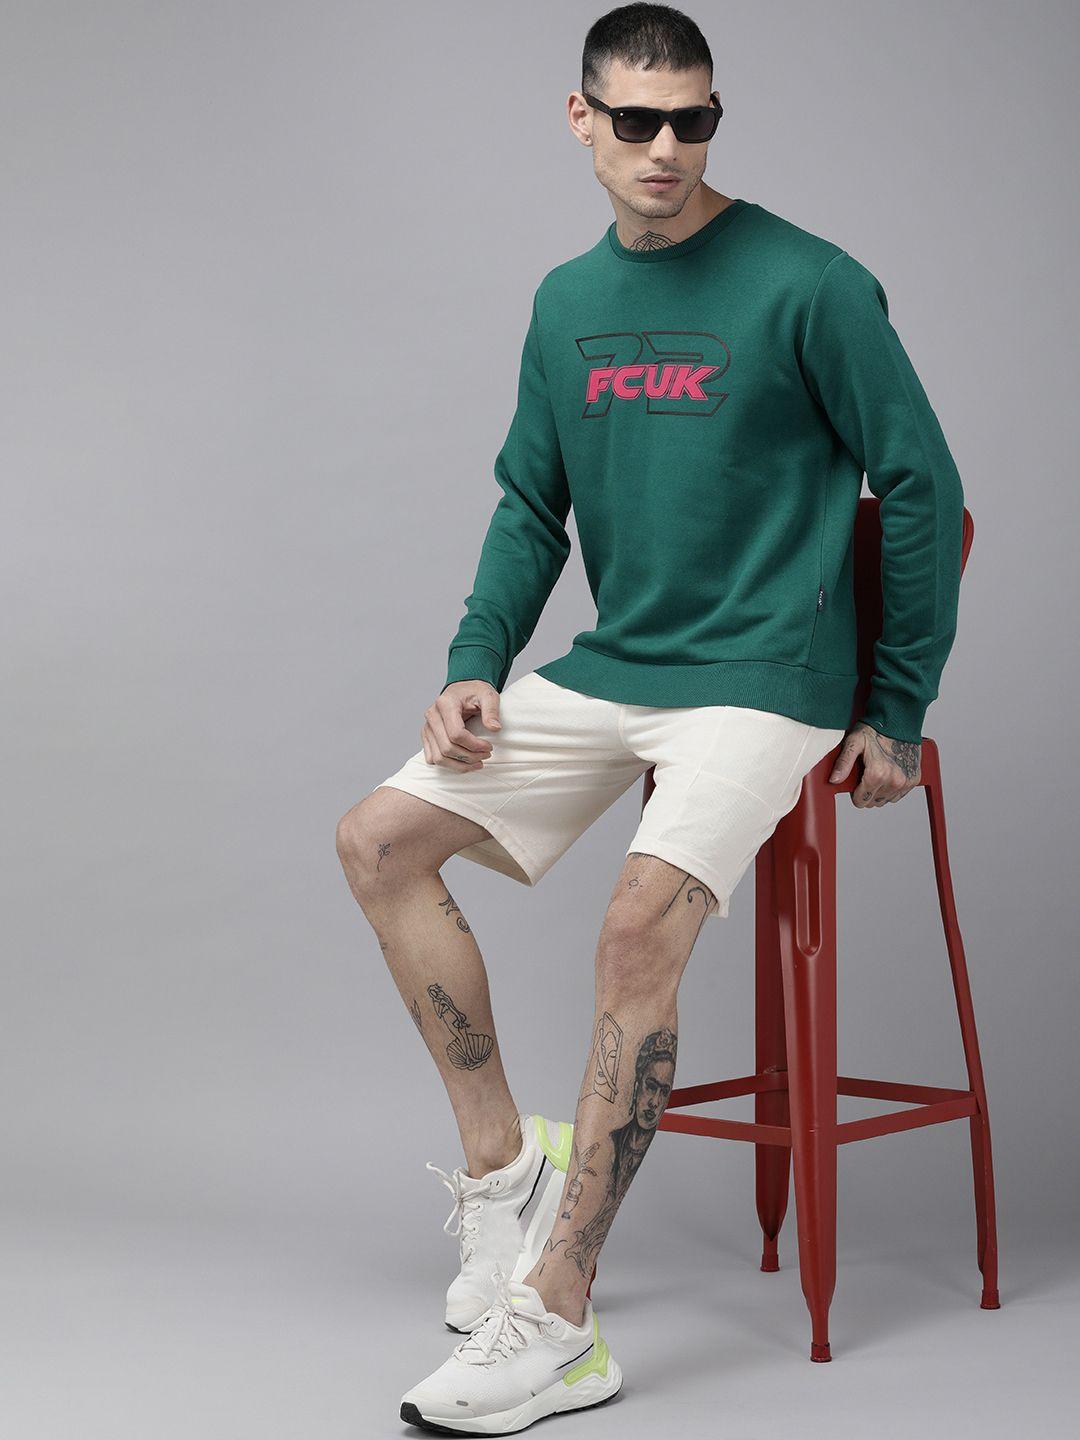 french connection men teal green printed pullover sweatshirt